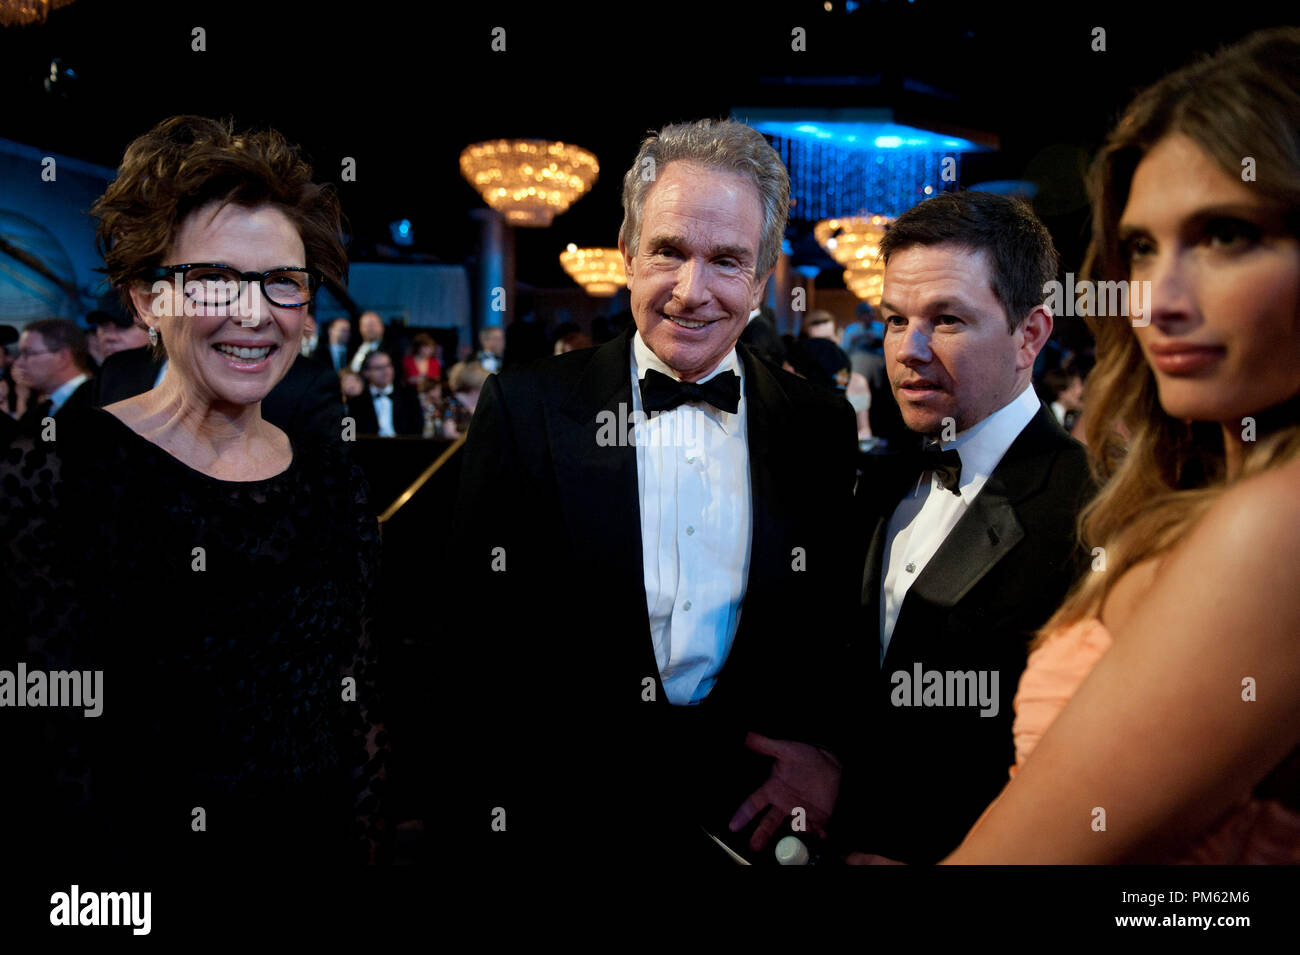 Annette Bening (left), Warren Beatty  (center) and Mark Wahlbergat the 68th Annual Golden Globe Awards at the Beverly Hilton in Beverly Hills, CA on Sunday, January 16, 2011. Stock Photo